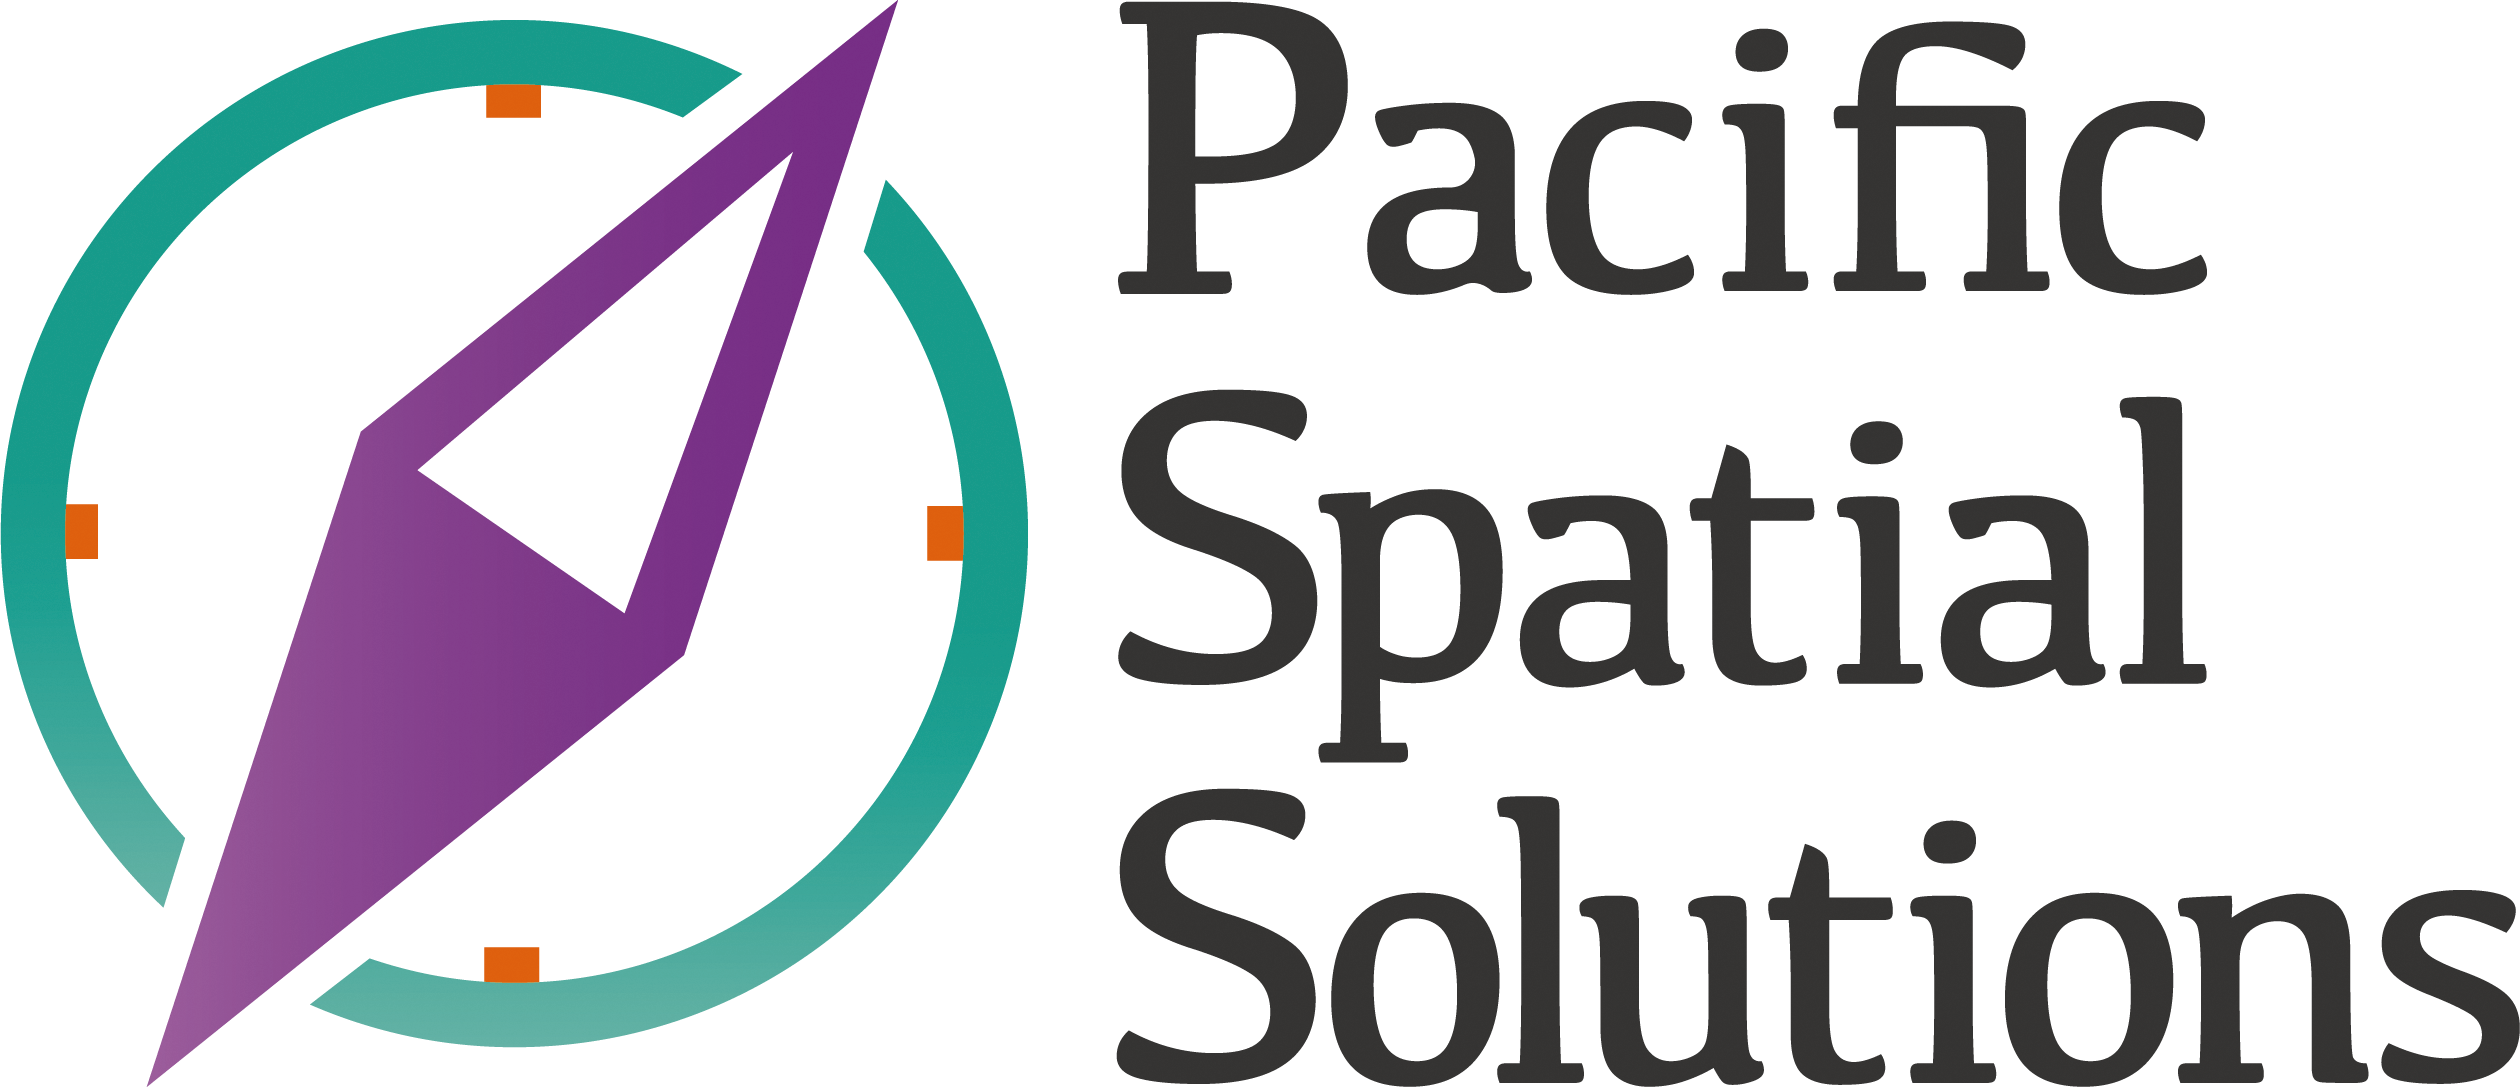 Pacific Spatial Solutions株式会社